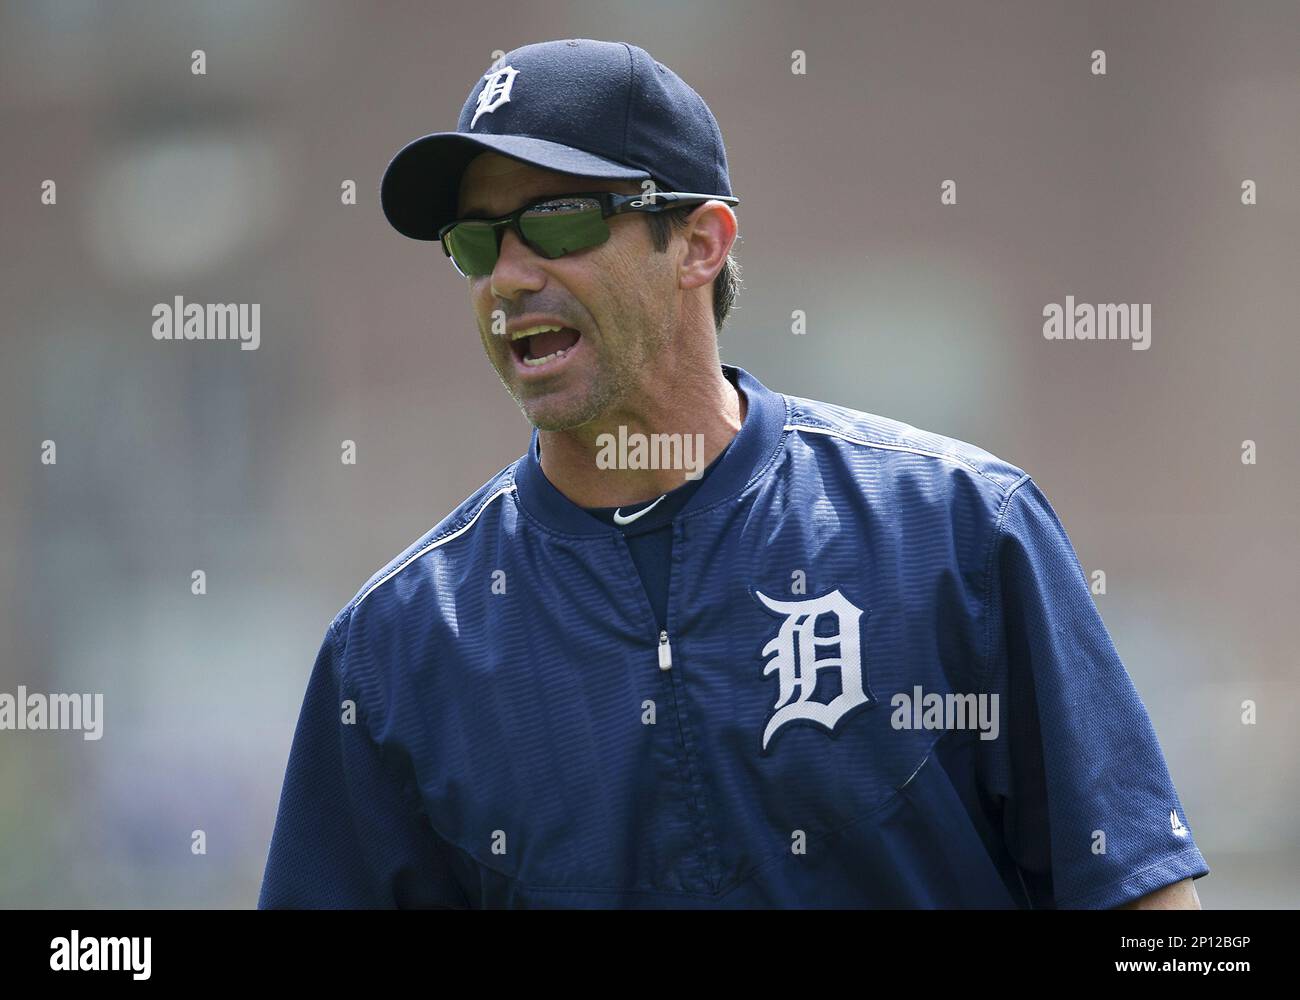 The Tigers will keep Brad Ausmus as manager in 2016 - NBC Sports